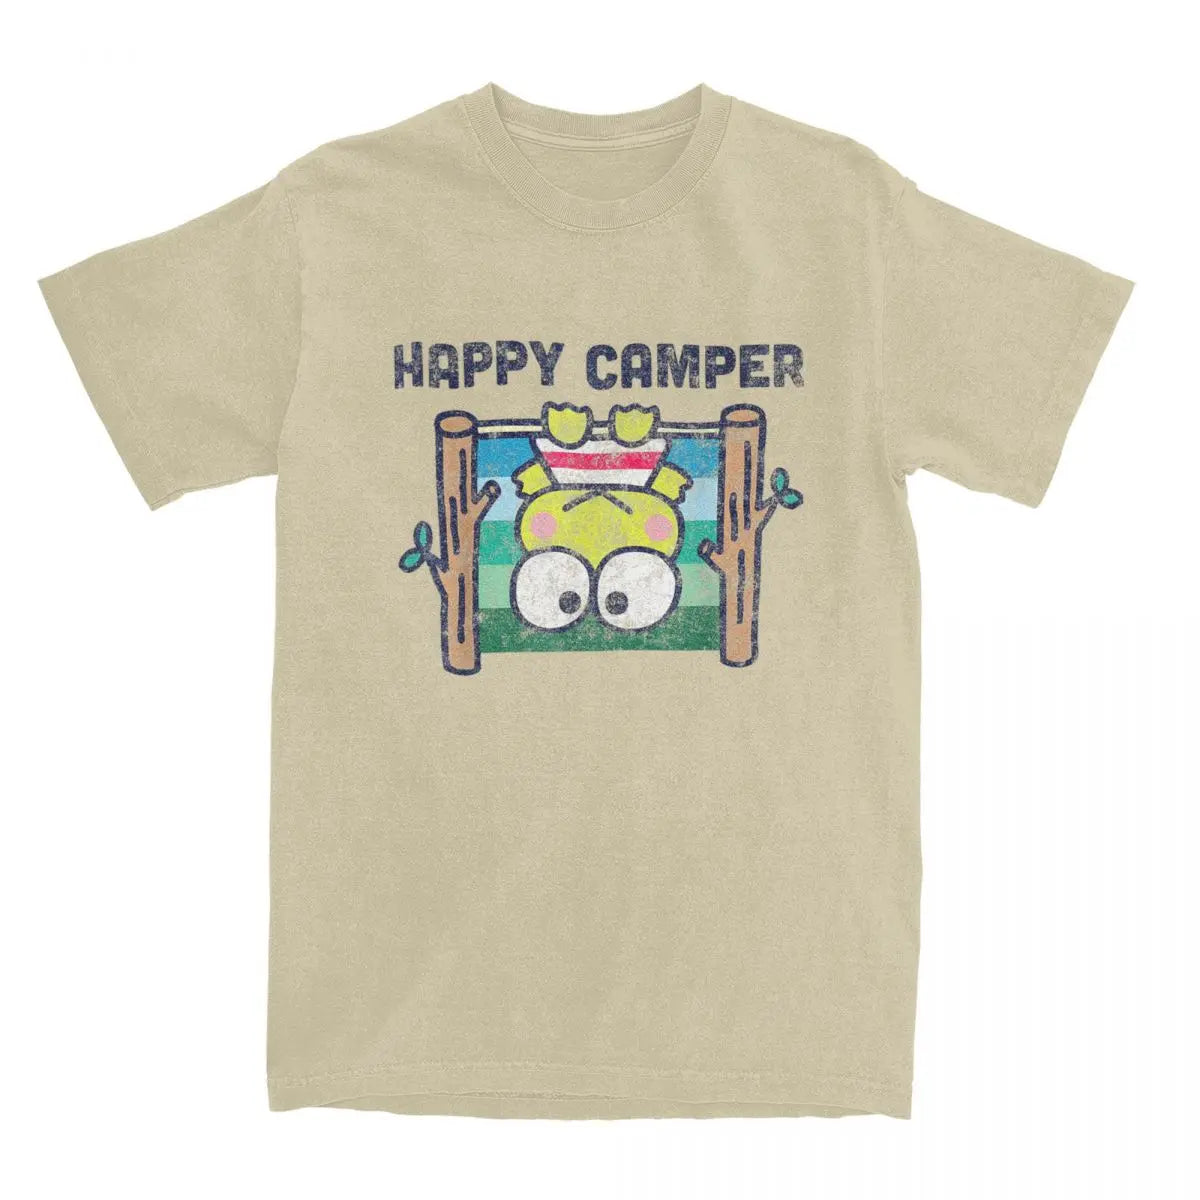 Perfect gift fro everyone is our Sanrio Keroppi "Happy Camper" Tee | Here at Everythinganimee we have the worlds best anime merch | Free Global Shipping